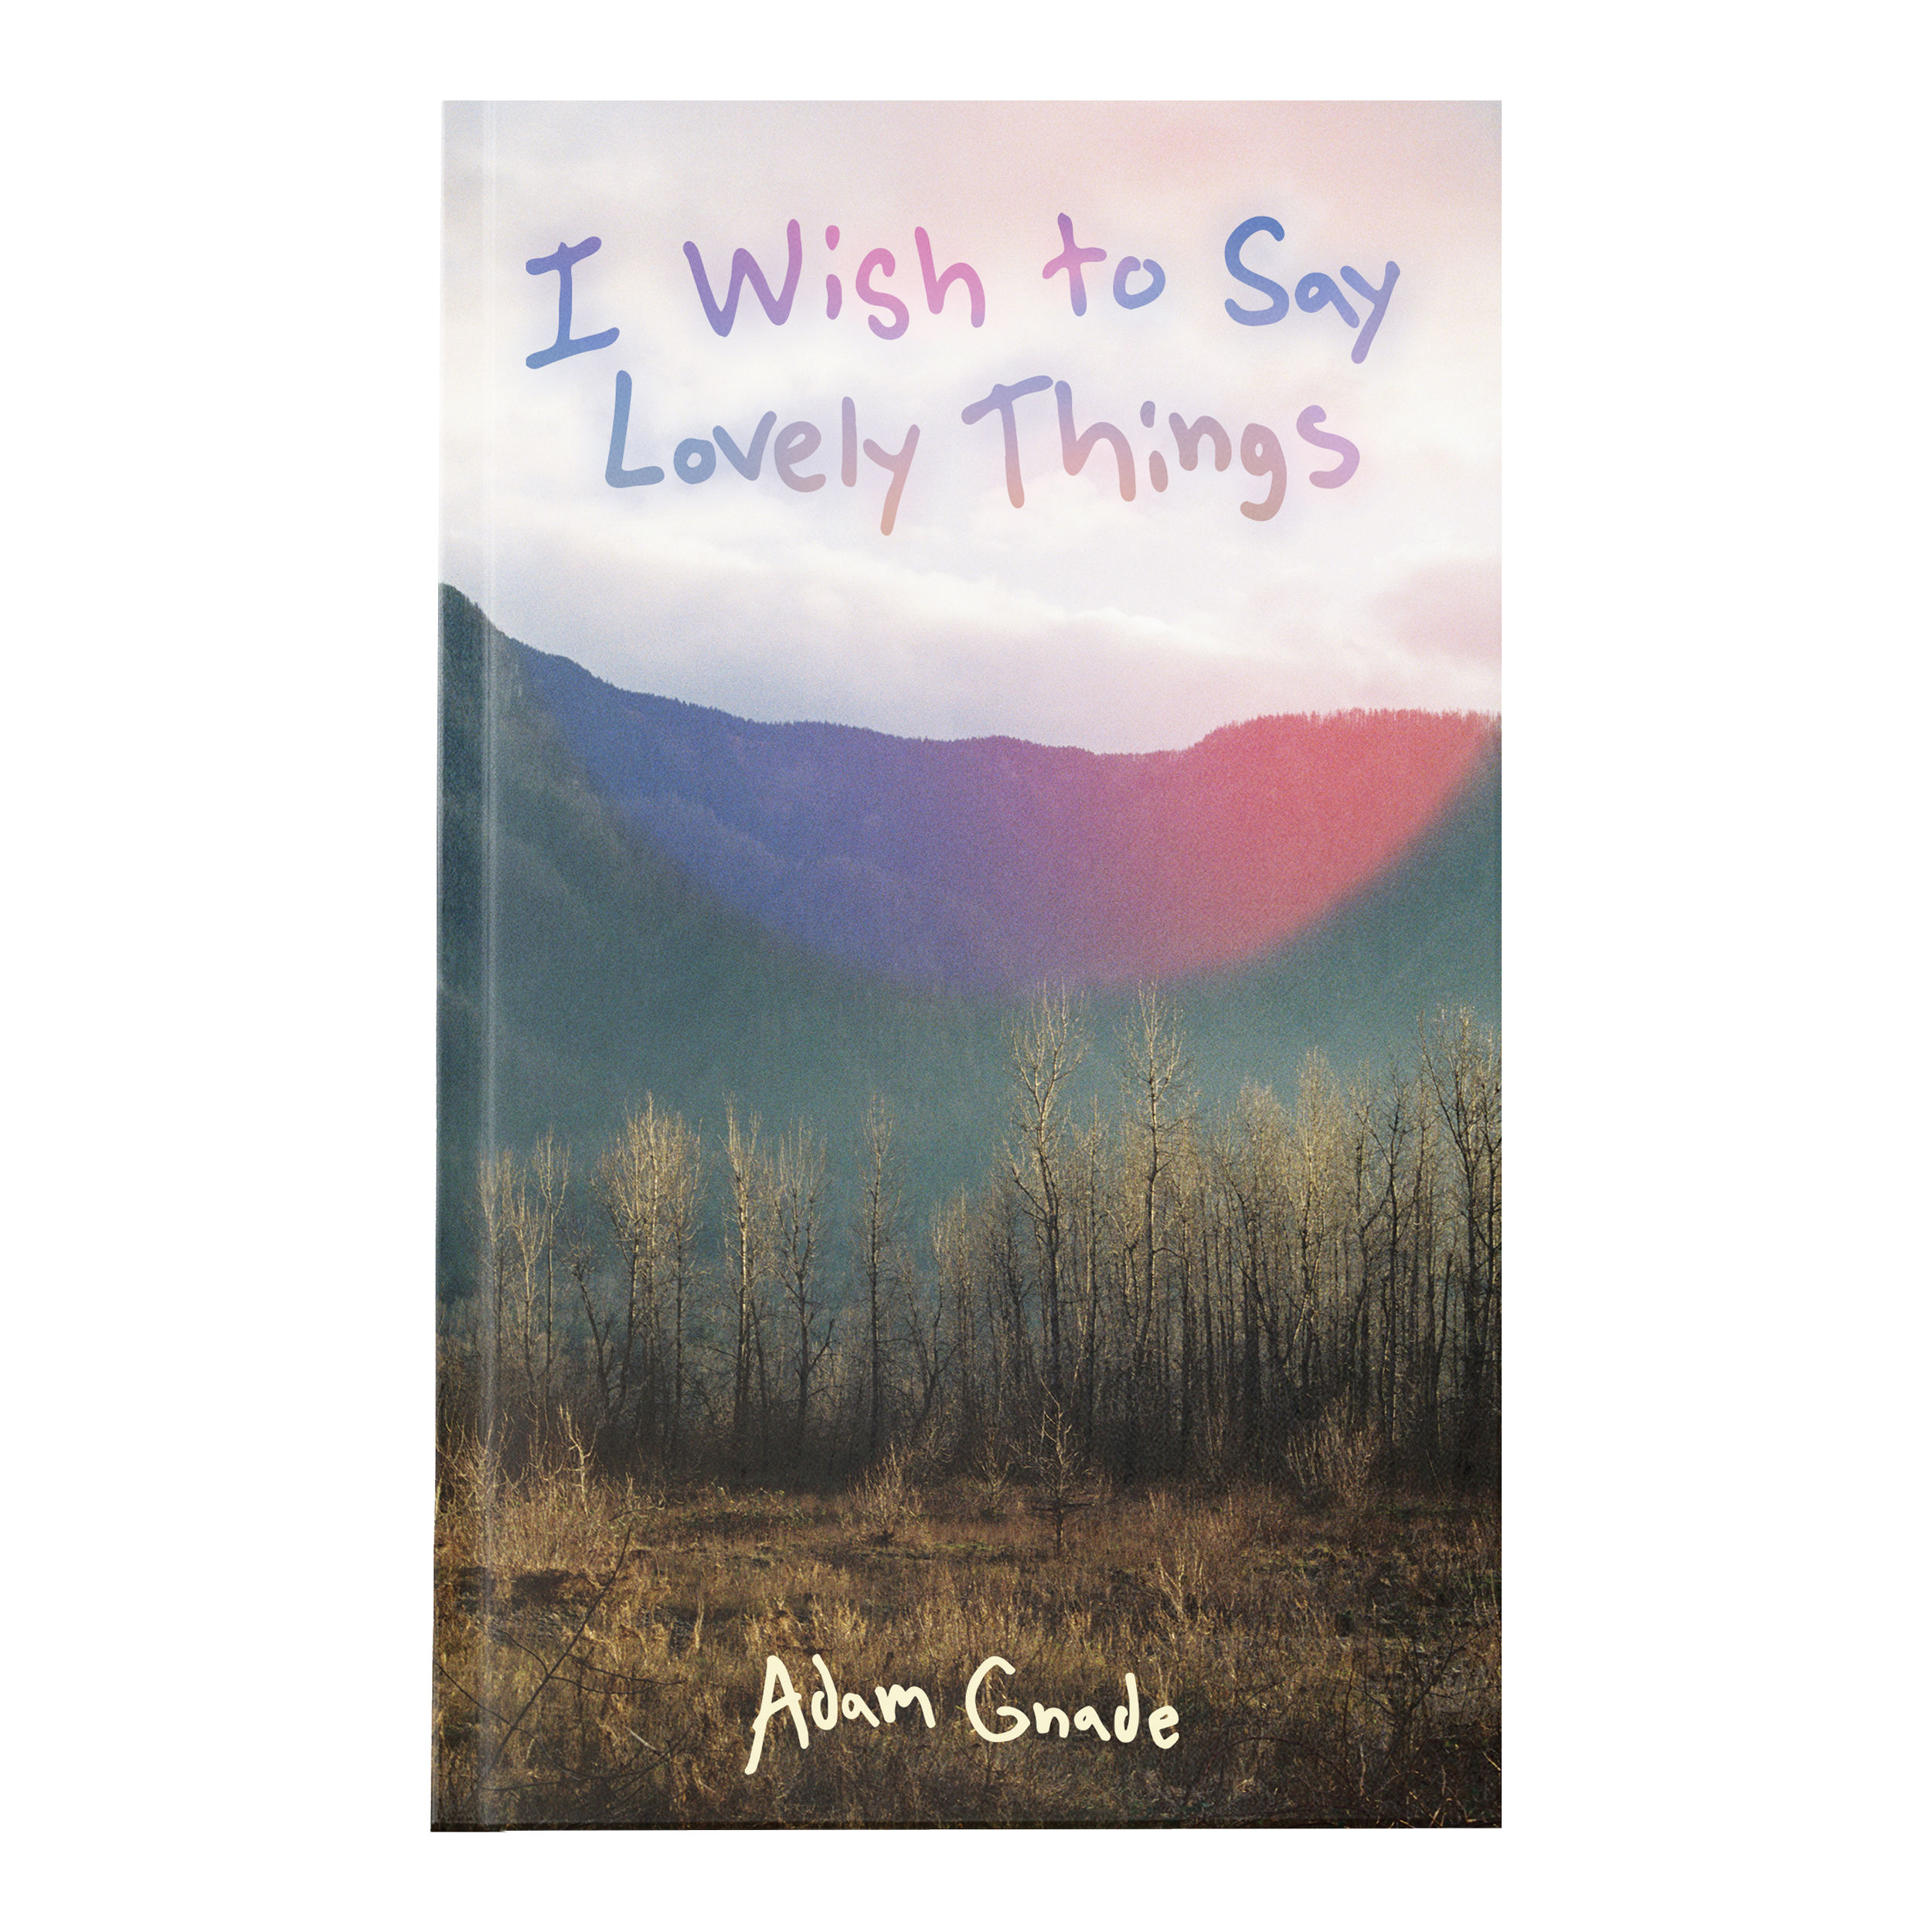 Adam Gnade - Wish to Say Lovely Things - Cover.png